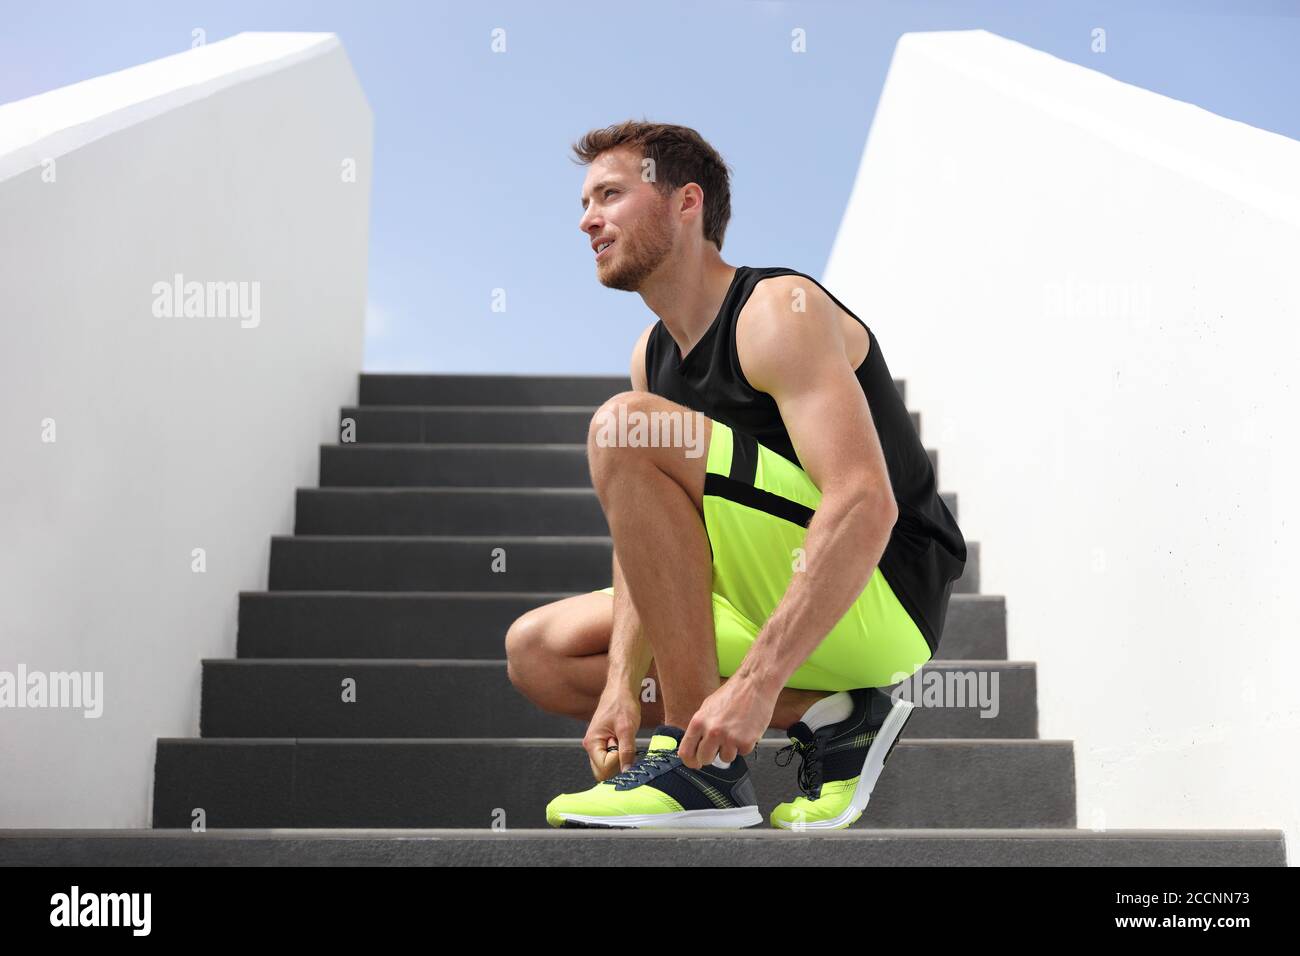 Runner man tying running shoes laces getting ready to run up the gym stairs training cardio hiit workout exercise on staircase. Acitve healthy Stock Photo